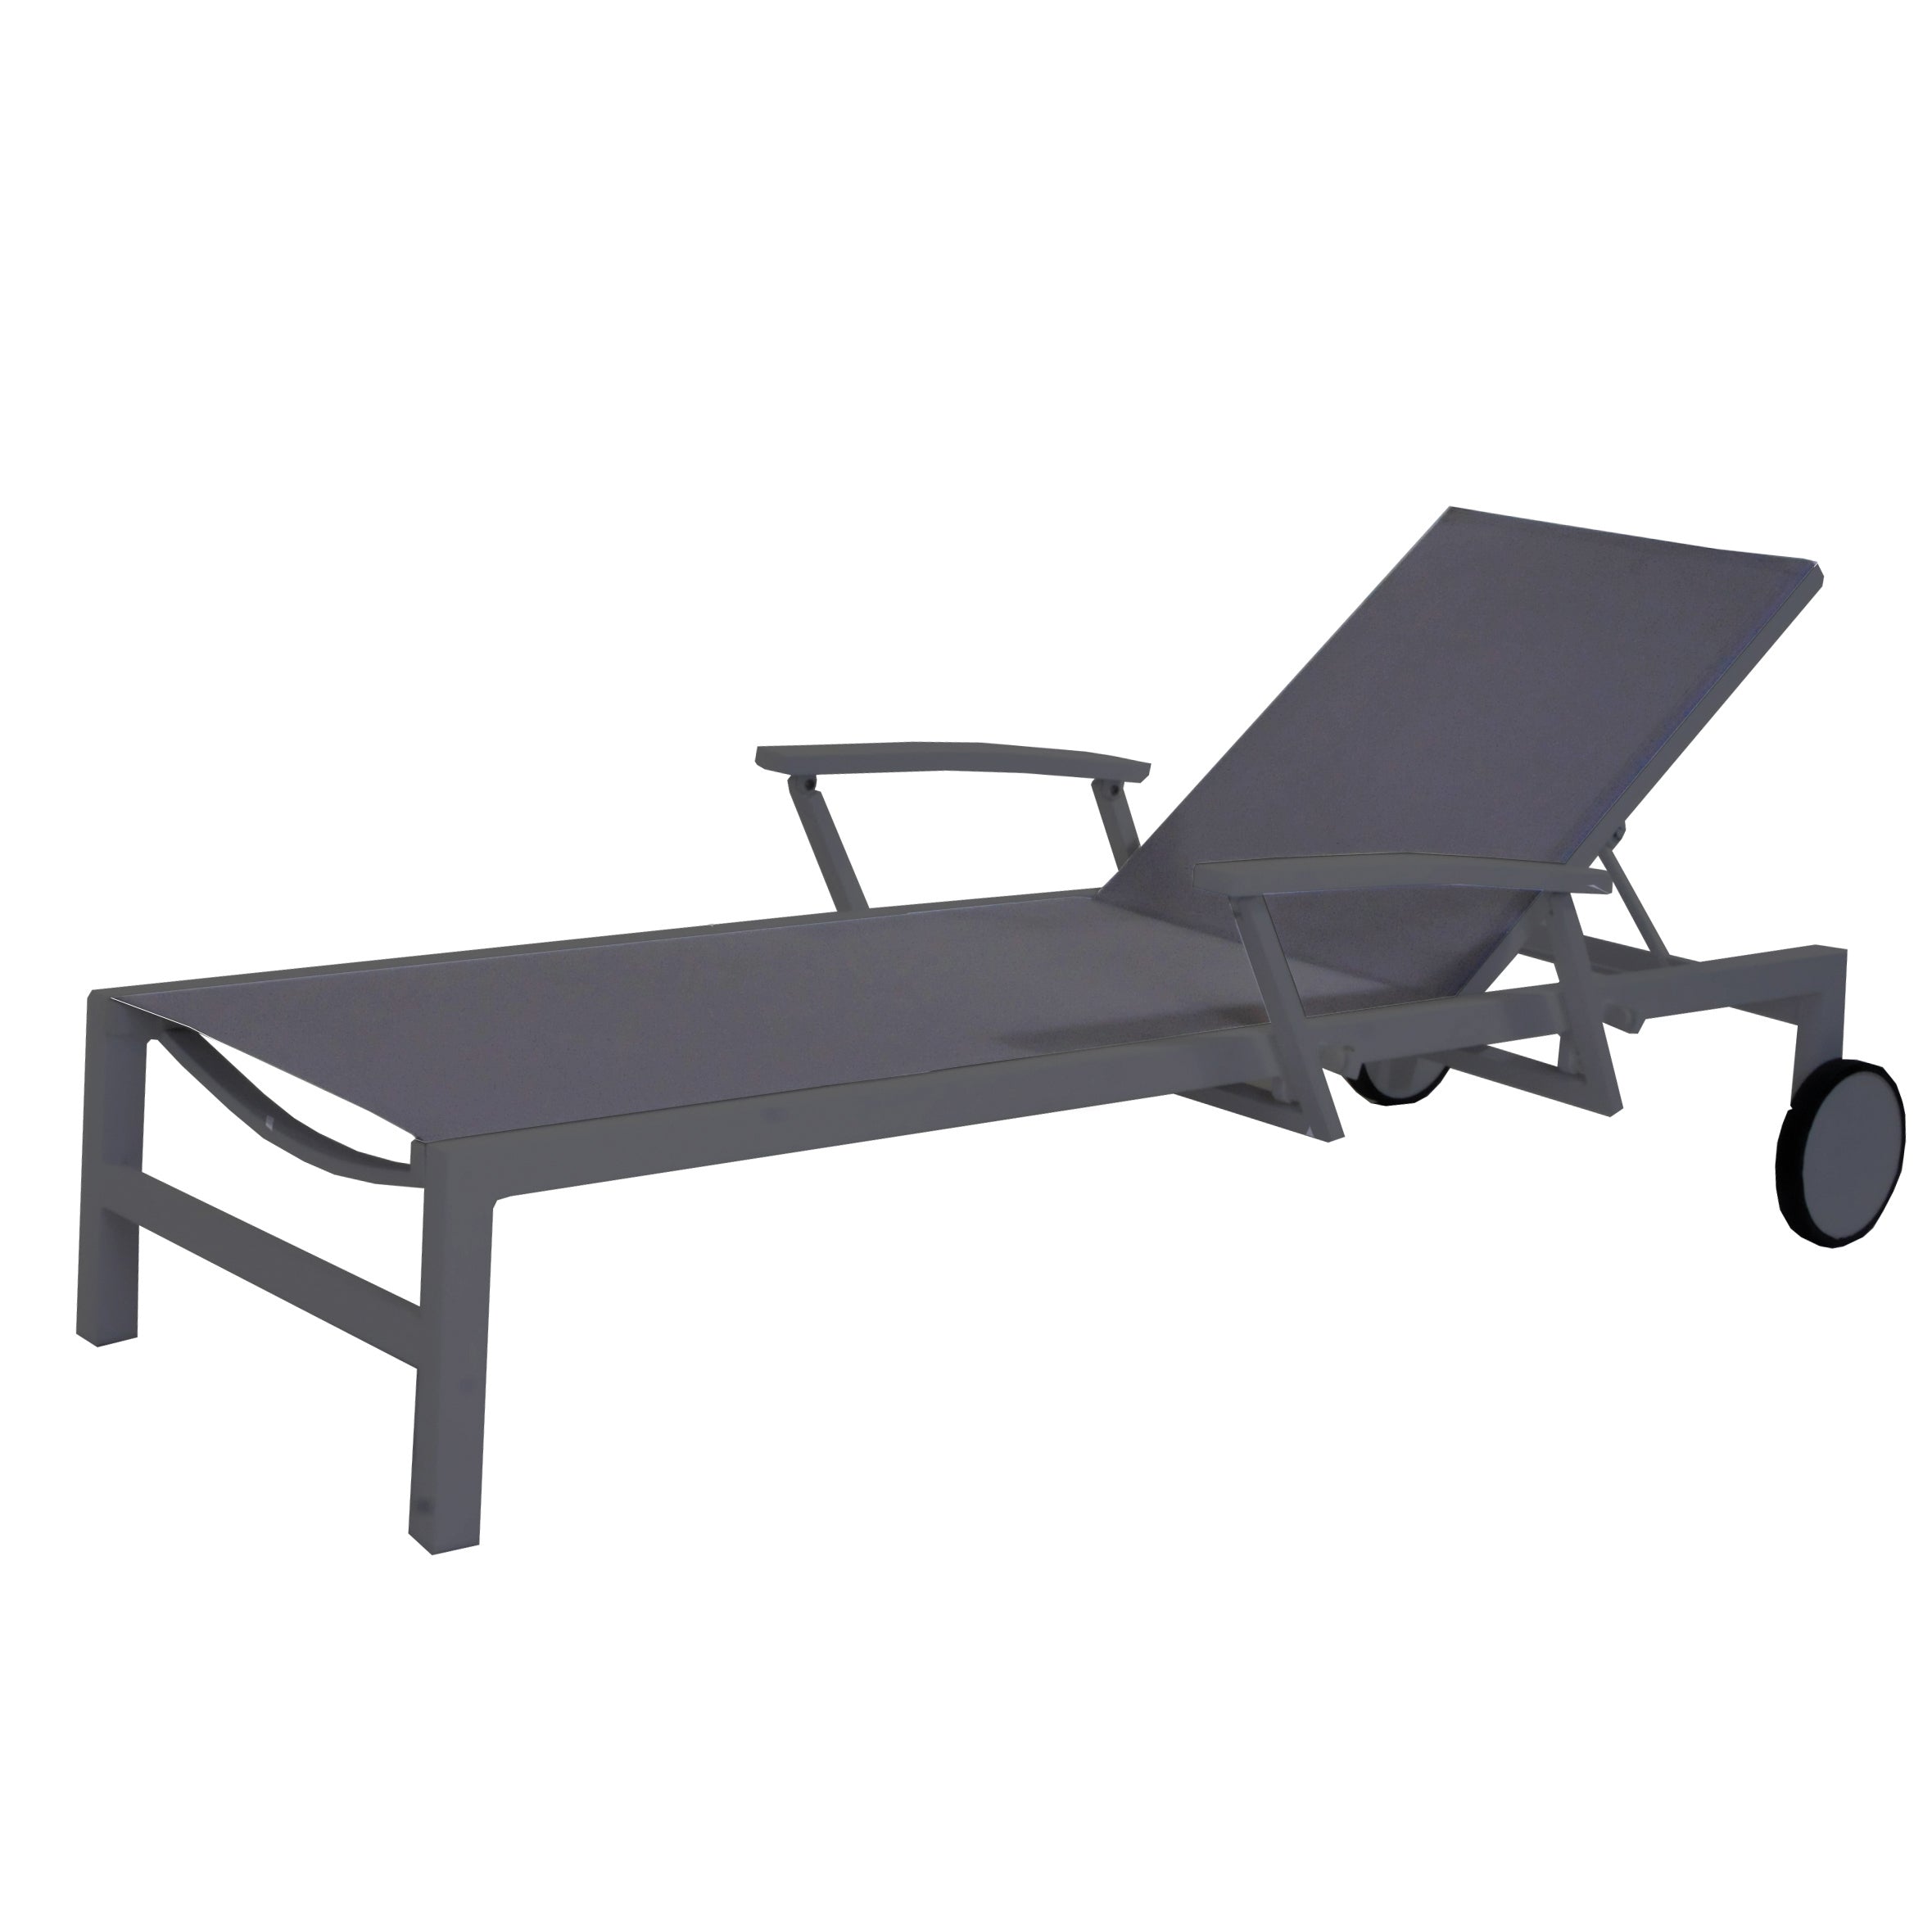 Anabel Sun Lounger - 2 Pack Sets